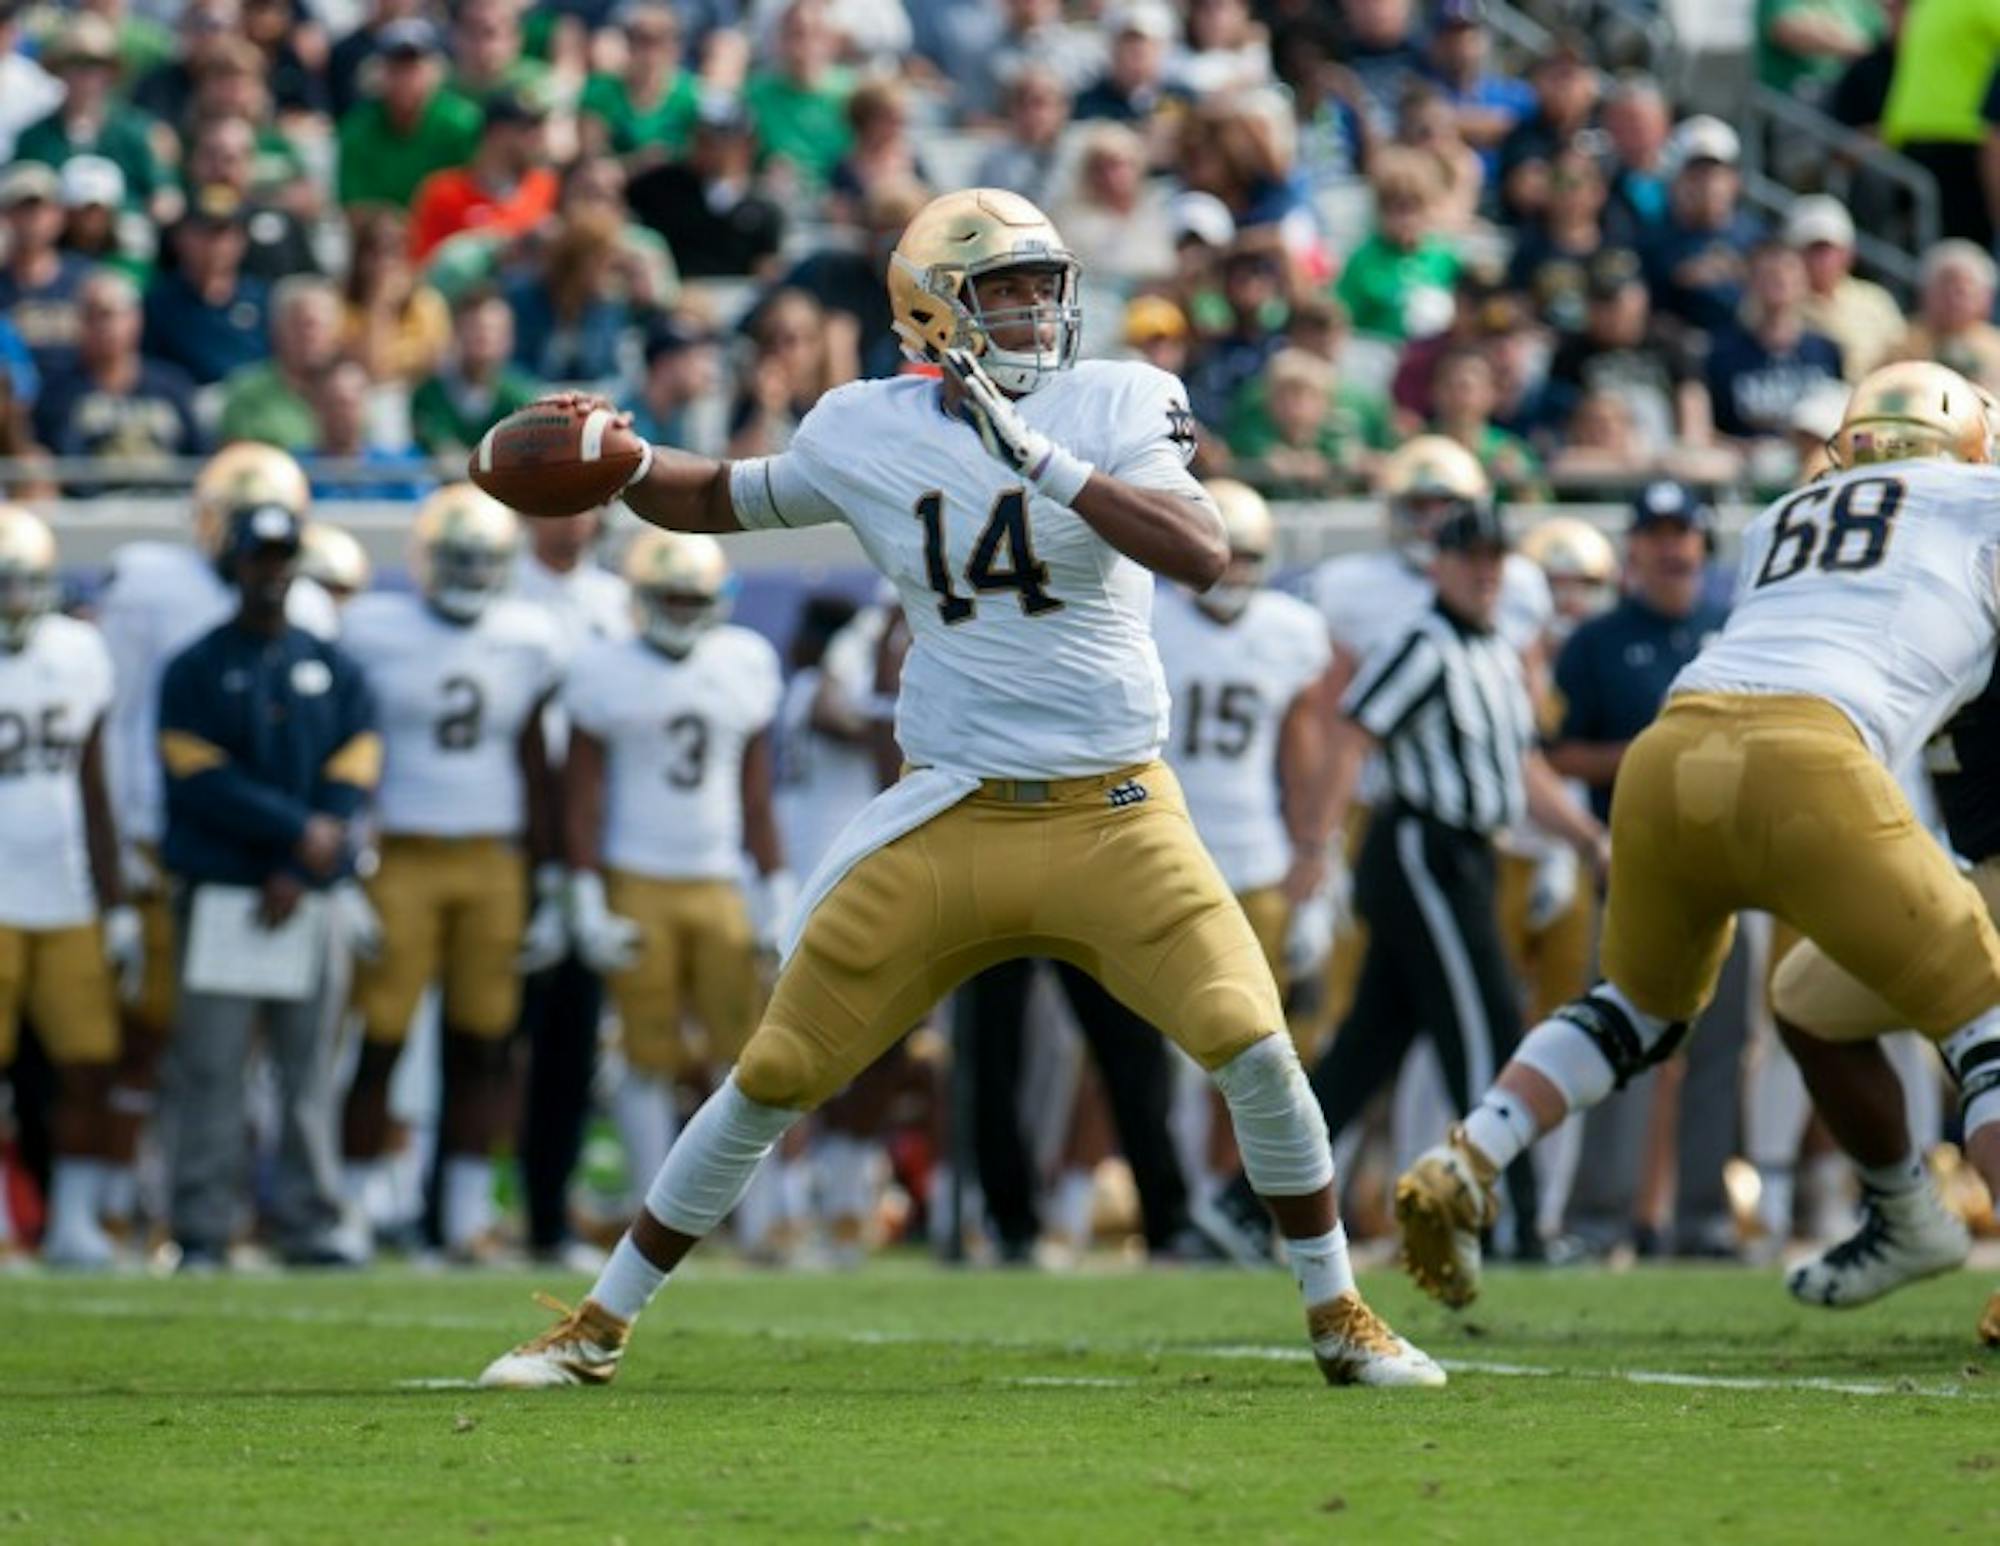 Junior quarterback DeShone Kizer drops back to pass during Notre Dame's 28-27 loss to Navy. Kizer threw for 223 yards and three touchdowns on the game.